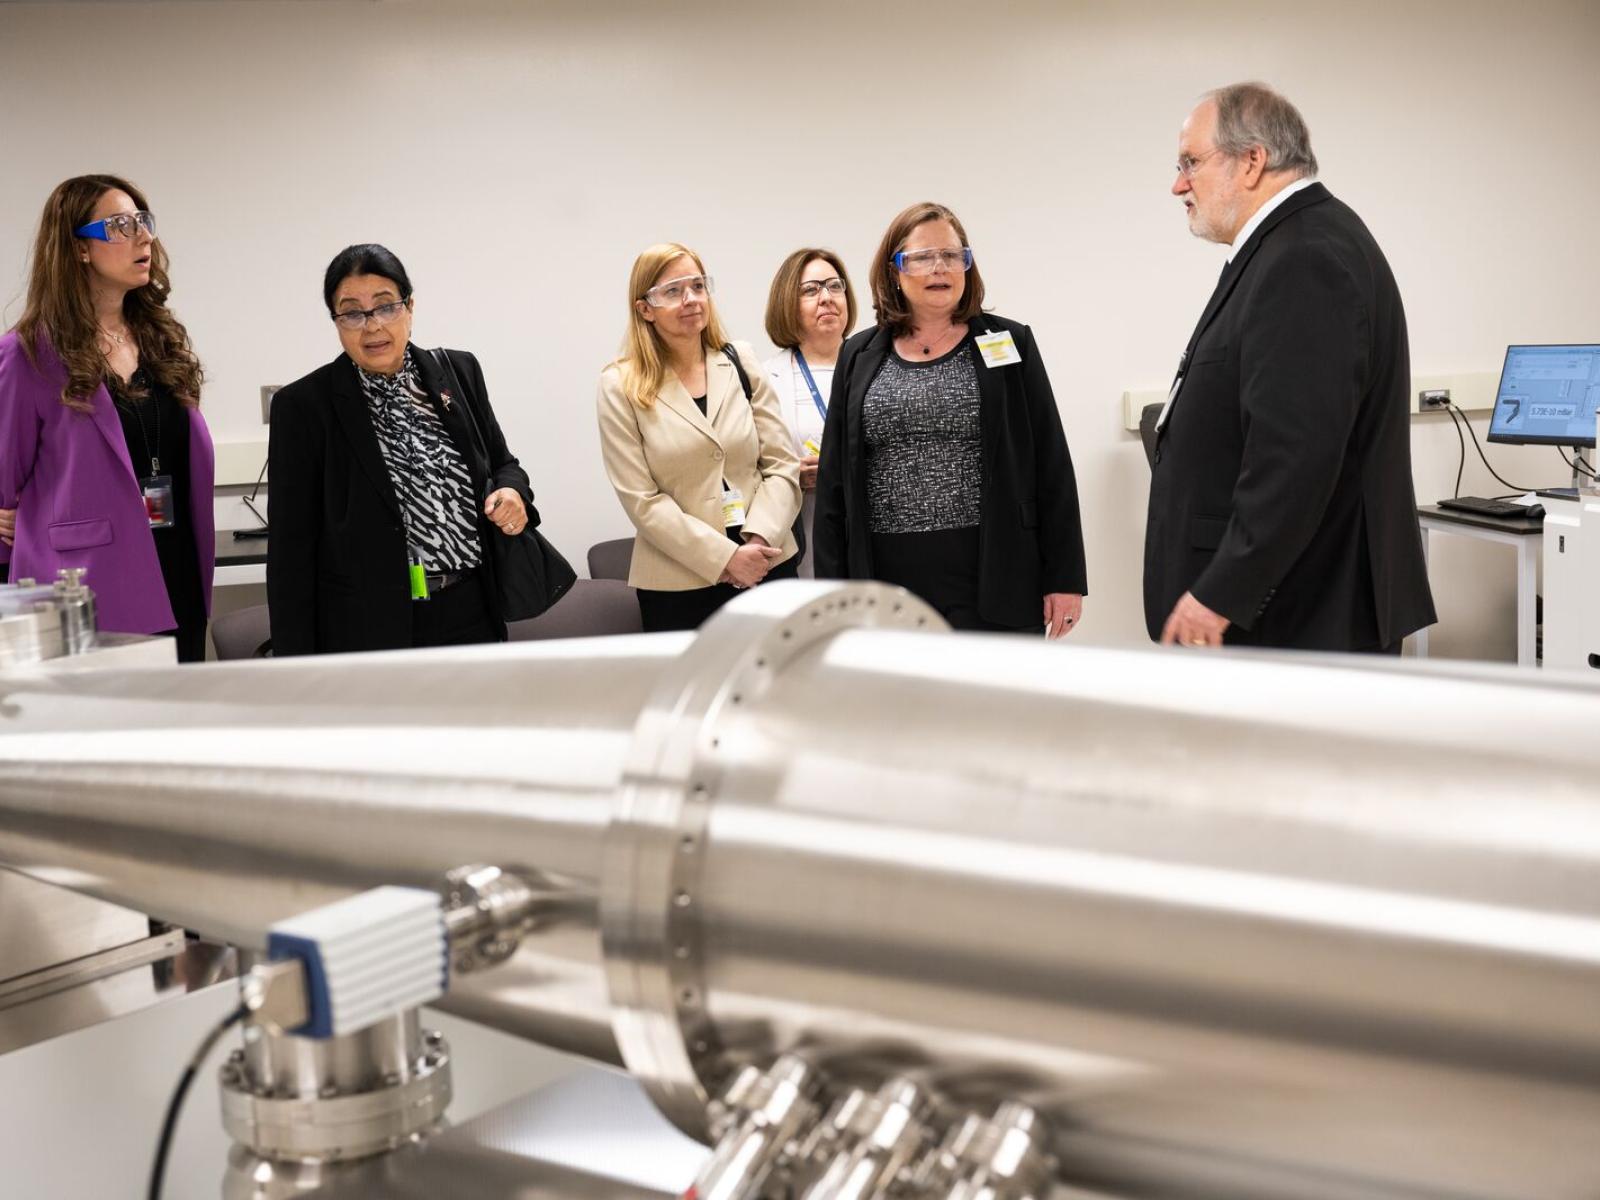 Six people standing near a mass spectrometer inside a facility building.